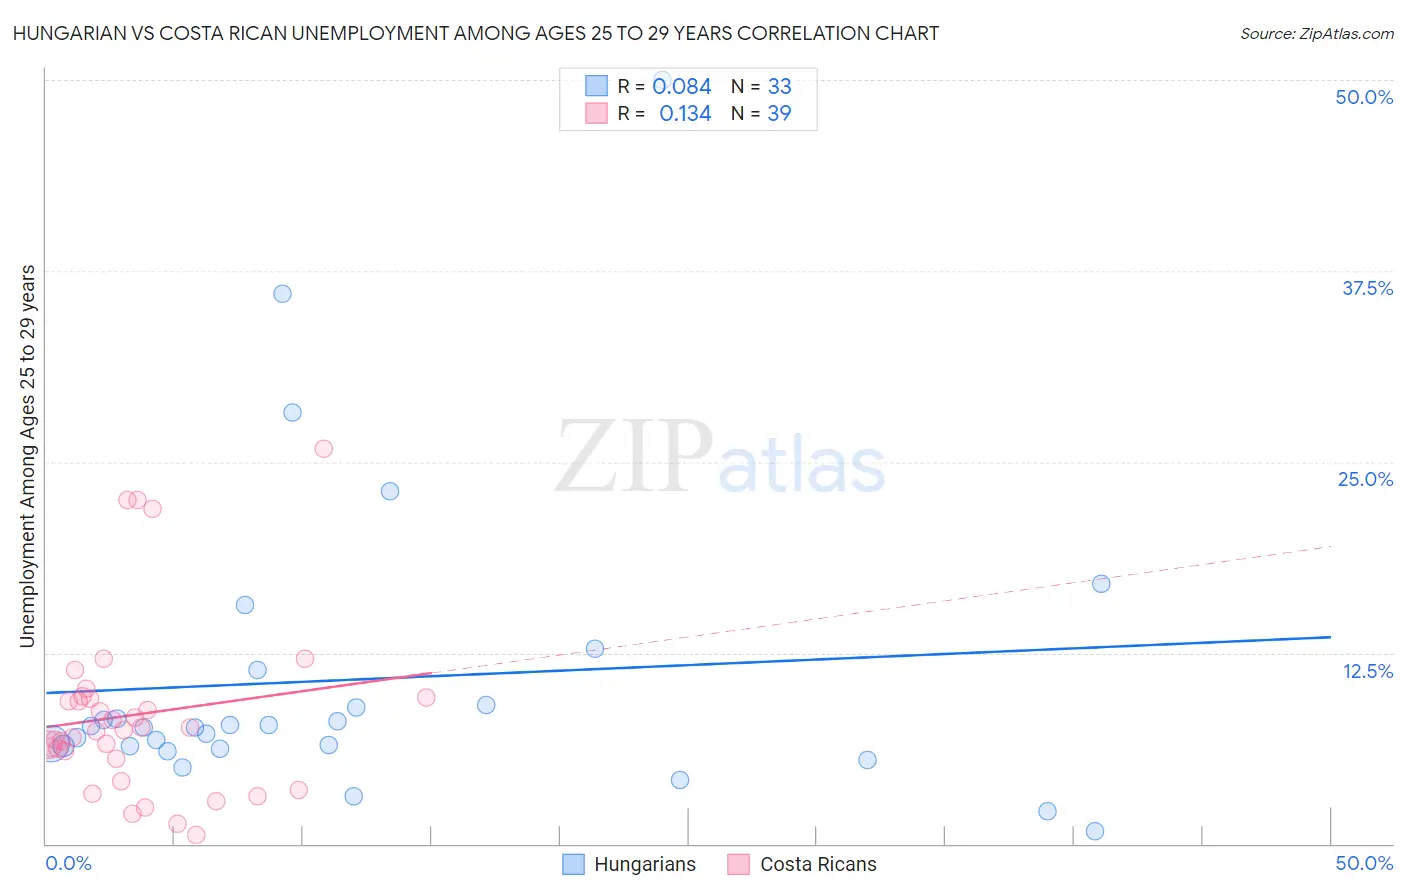 Hungarian vs Costa Rican Unemployment Among Ages 25 to 29 years